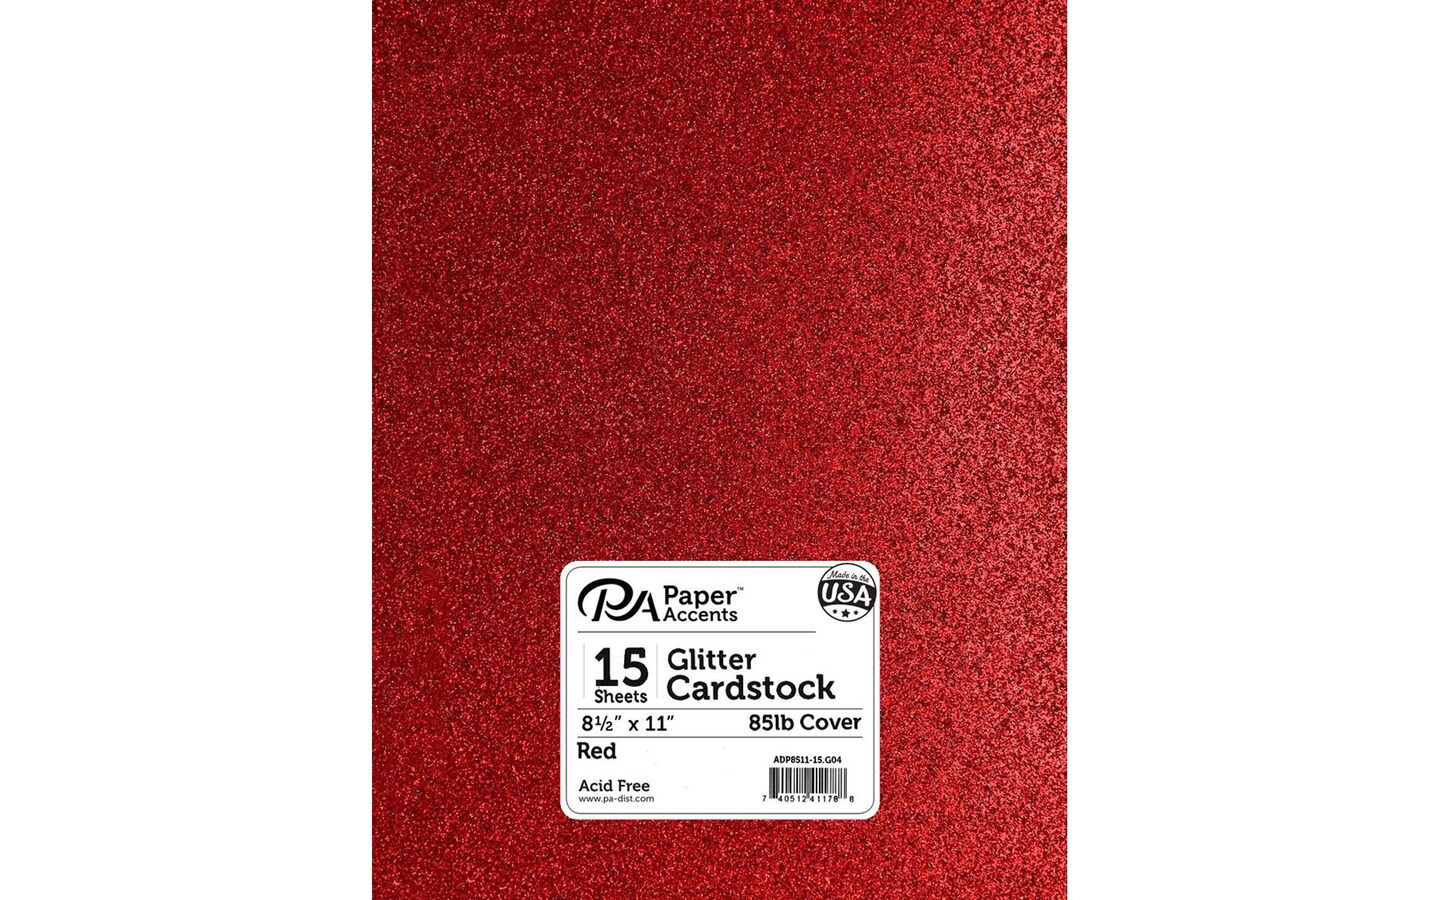 PA Paper Accents Glitter Cardstock 8.5&#x22; x 11&#x22; Red, 85lb colored cardstock paper for card making, scrapbooking, printing, quilling and crafts, 15 piece pack